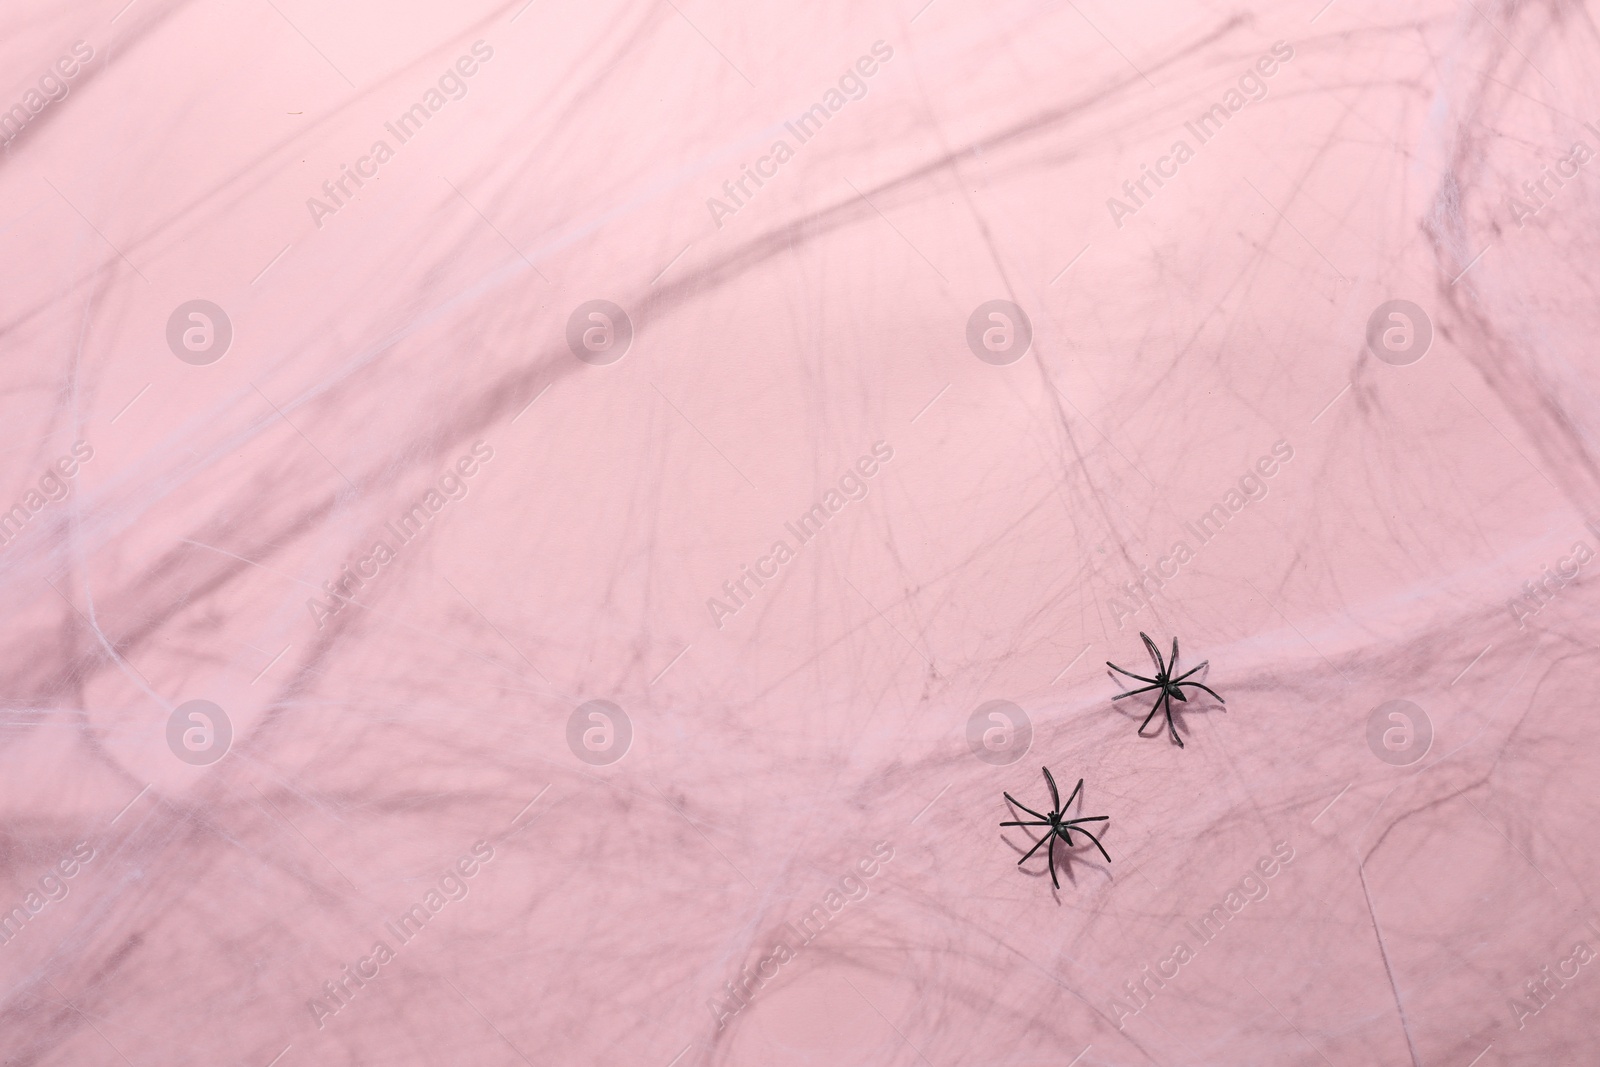 Photo of Cobweb and spiders on pink background, top view